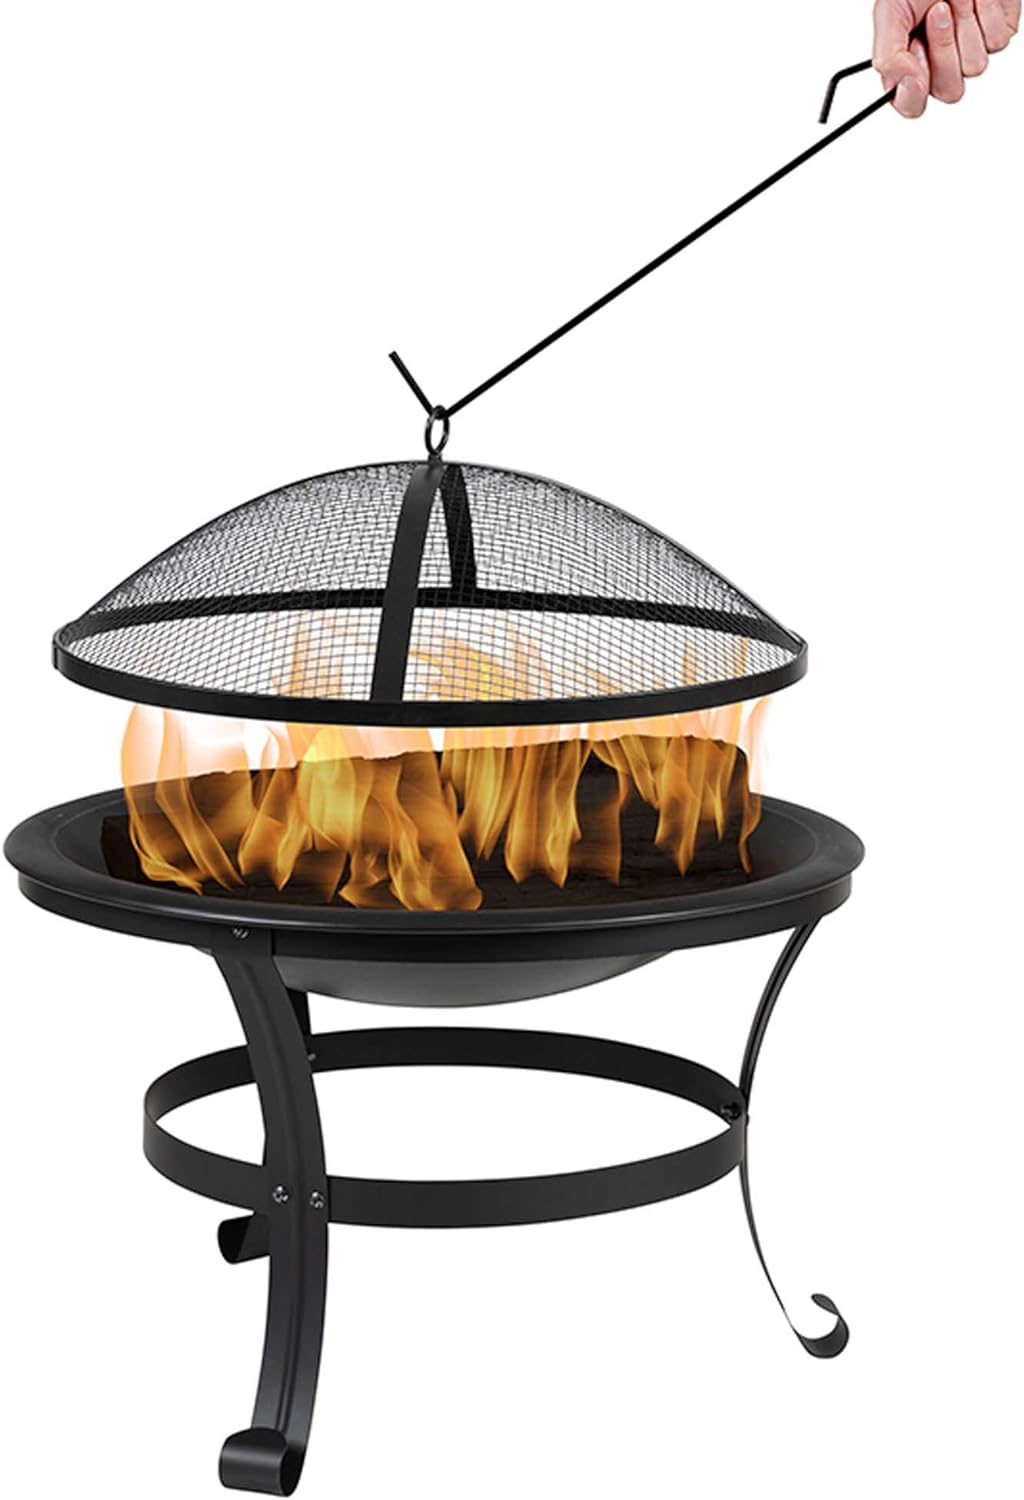 Flash Furniture Chelton 22" Round Wood Burning Firepit with Mesh Spark Screen and Poker , Black